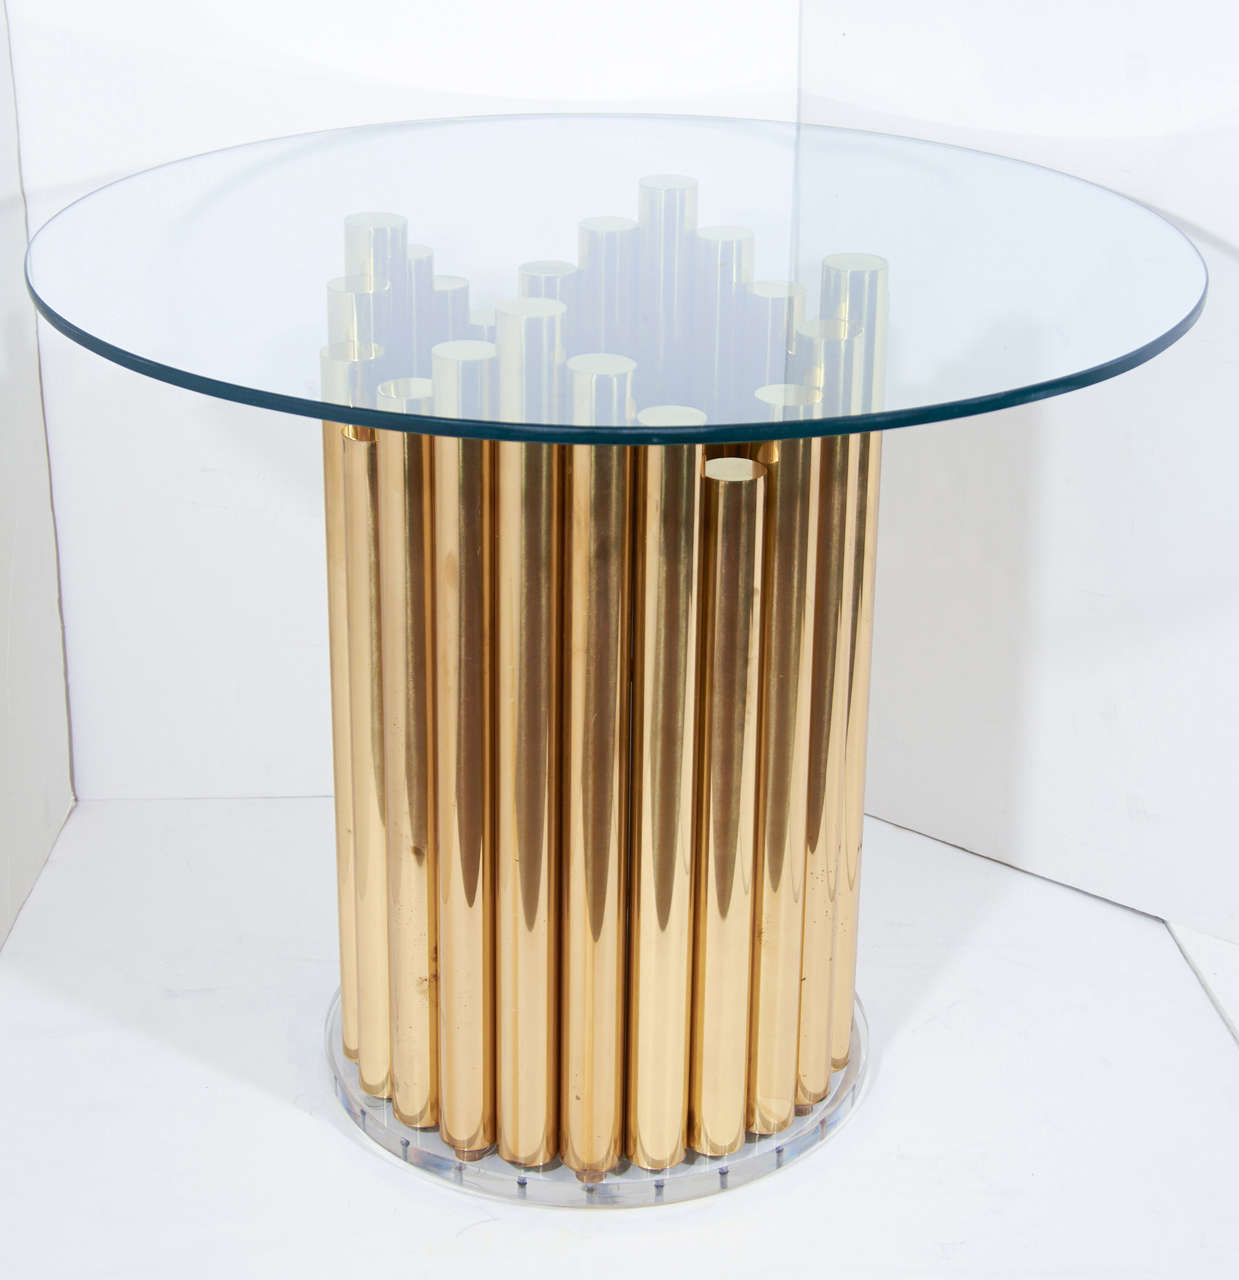 Modernist table with sculptural form comprised of a tubular brass pedestal base with thick circular lucite support and glass top. The table base has a skyscraper design with brass cylinders at alternating heights.  It can be used as either a center